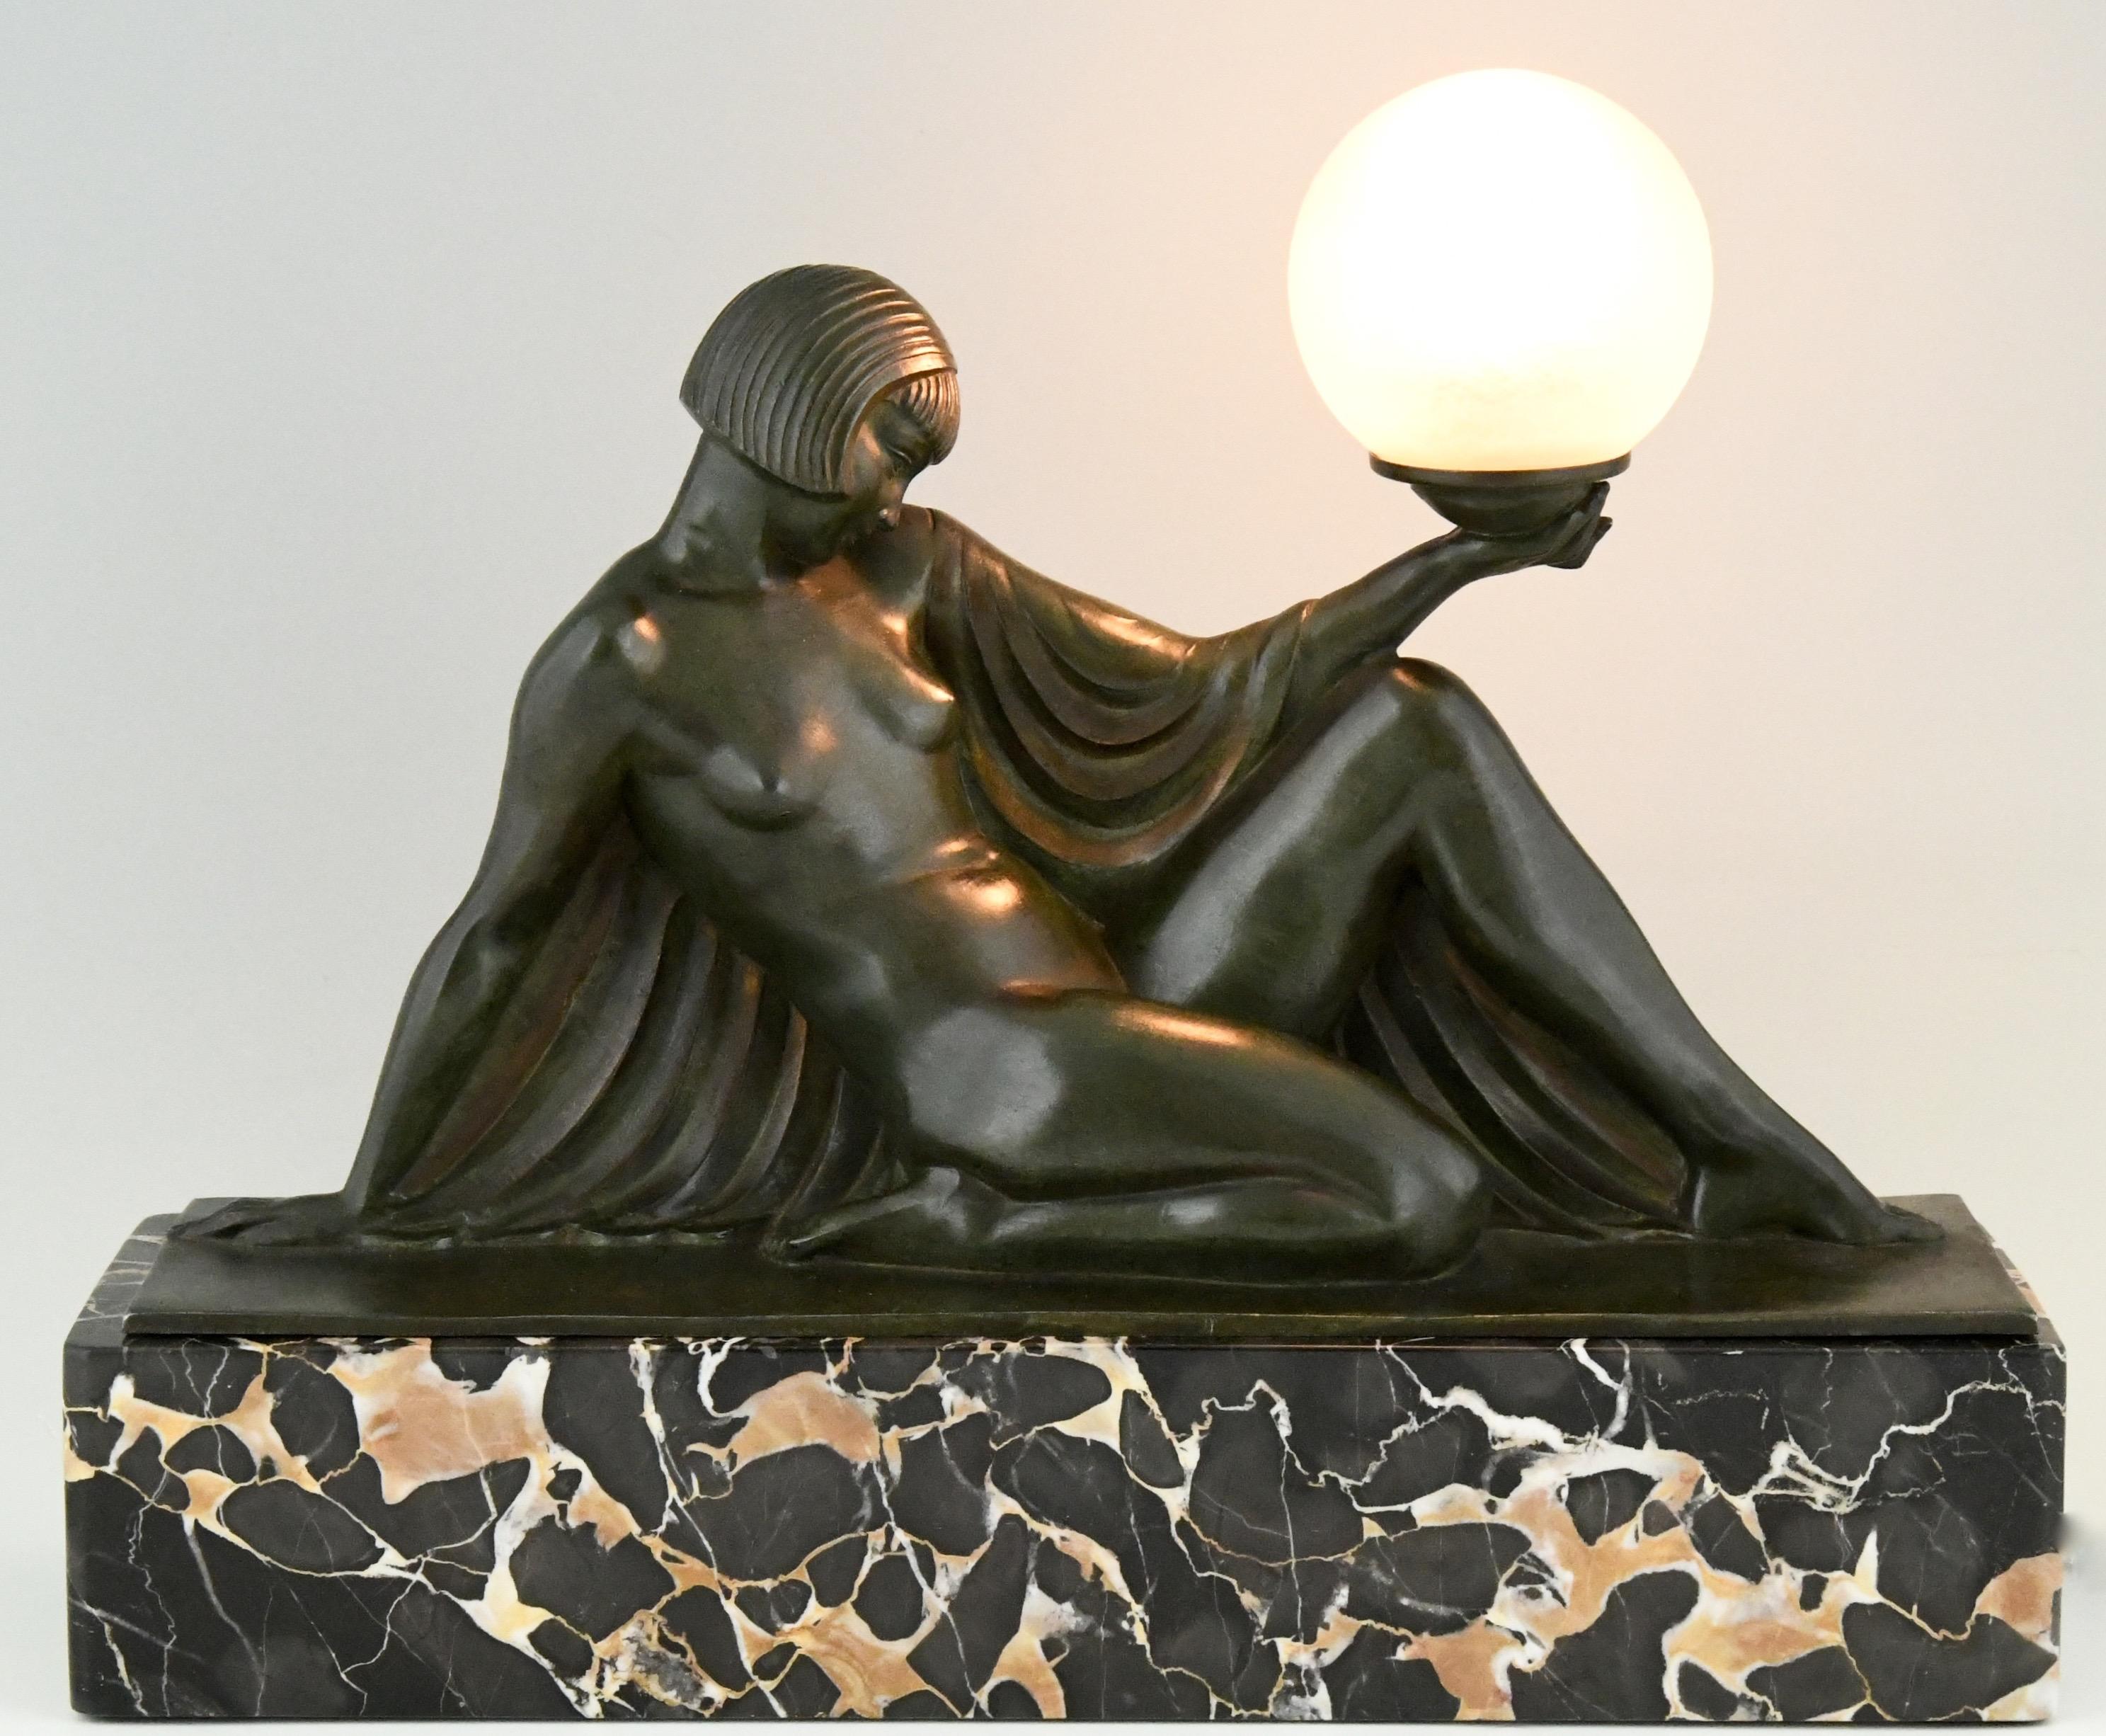 Rèverie original Art Deco lamp seated nude with drape holding a globe by Raymonde Guerbe for Max Le Verrier. With the original glass globe signed by Daum Nancy, France. Art metal sculpture with dark green patina mounted on a Portor marble base.